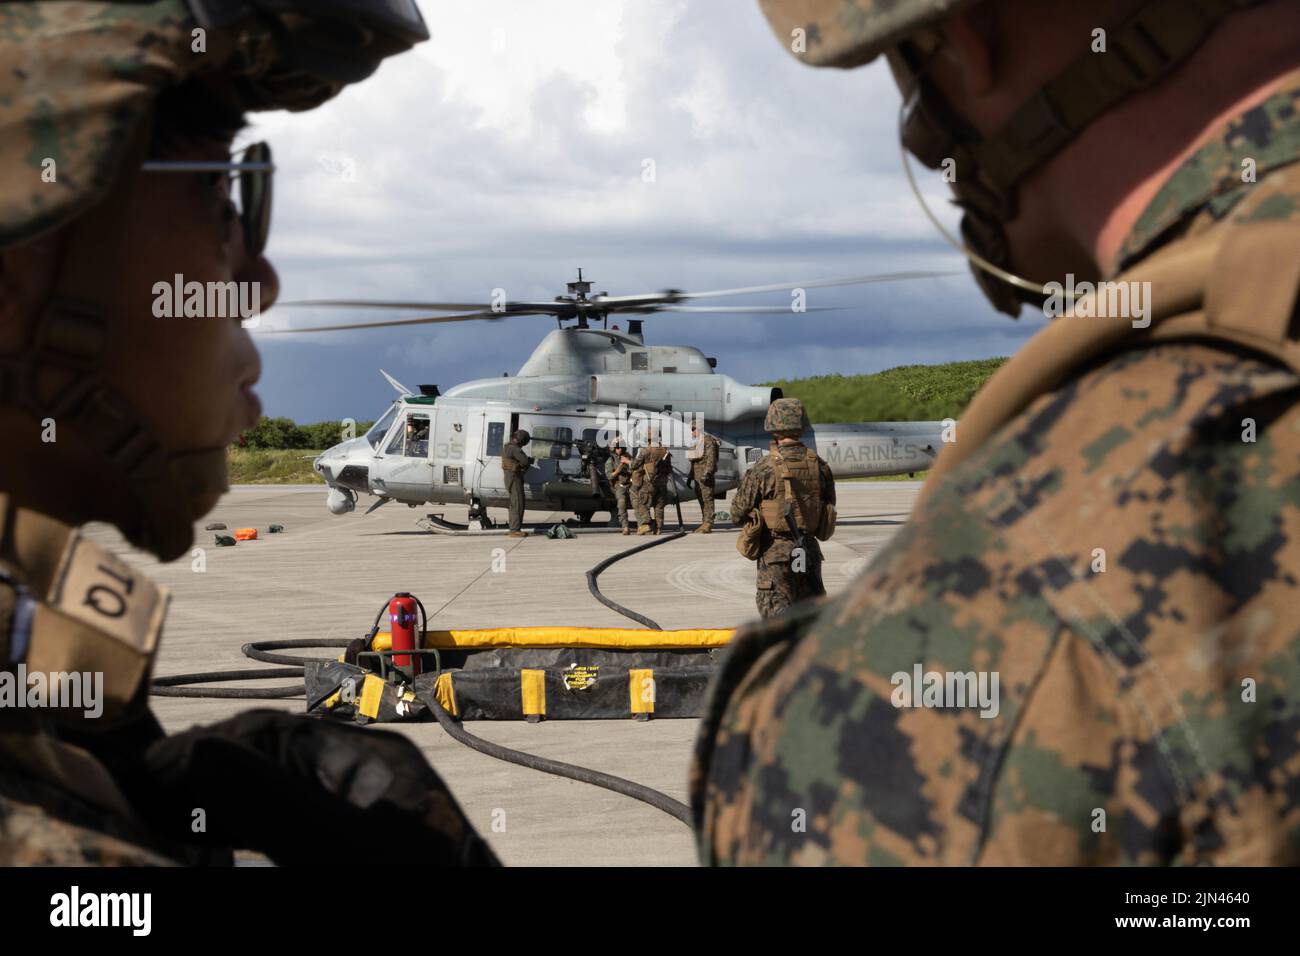 U.S. Marines with Marine Medium Tiltrotor Squadron 262 (Rein.), 31st Marine Expeditionary Unit, refuel an AH-1W Super Cobra during a forward arming and refueling point exercise on Ie Shima, Okinawa, Japan, Aug. 04, 2022. A FARP is a point of operation used for fueling and rearming an aircraft outside of a forward operating base. The 31st MEU is operating aboard ships of the Tripoli Amphibious Ready Group in the 7th Fleet area of operations to enhance interoperability with allies and partners and serve as a ready response force to defend peace and stability in the Indo-Pacific region. (U.S. Mar Stock Photo